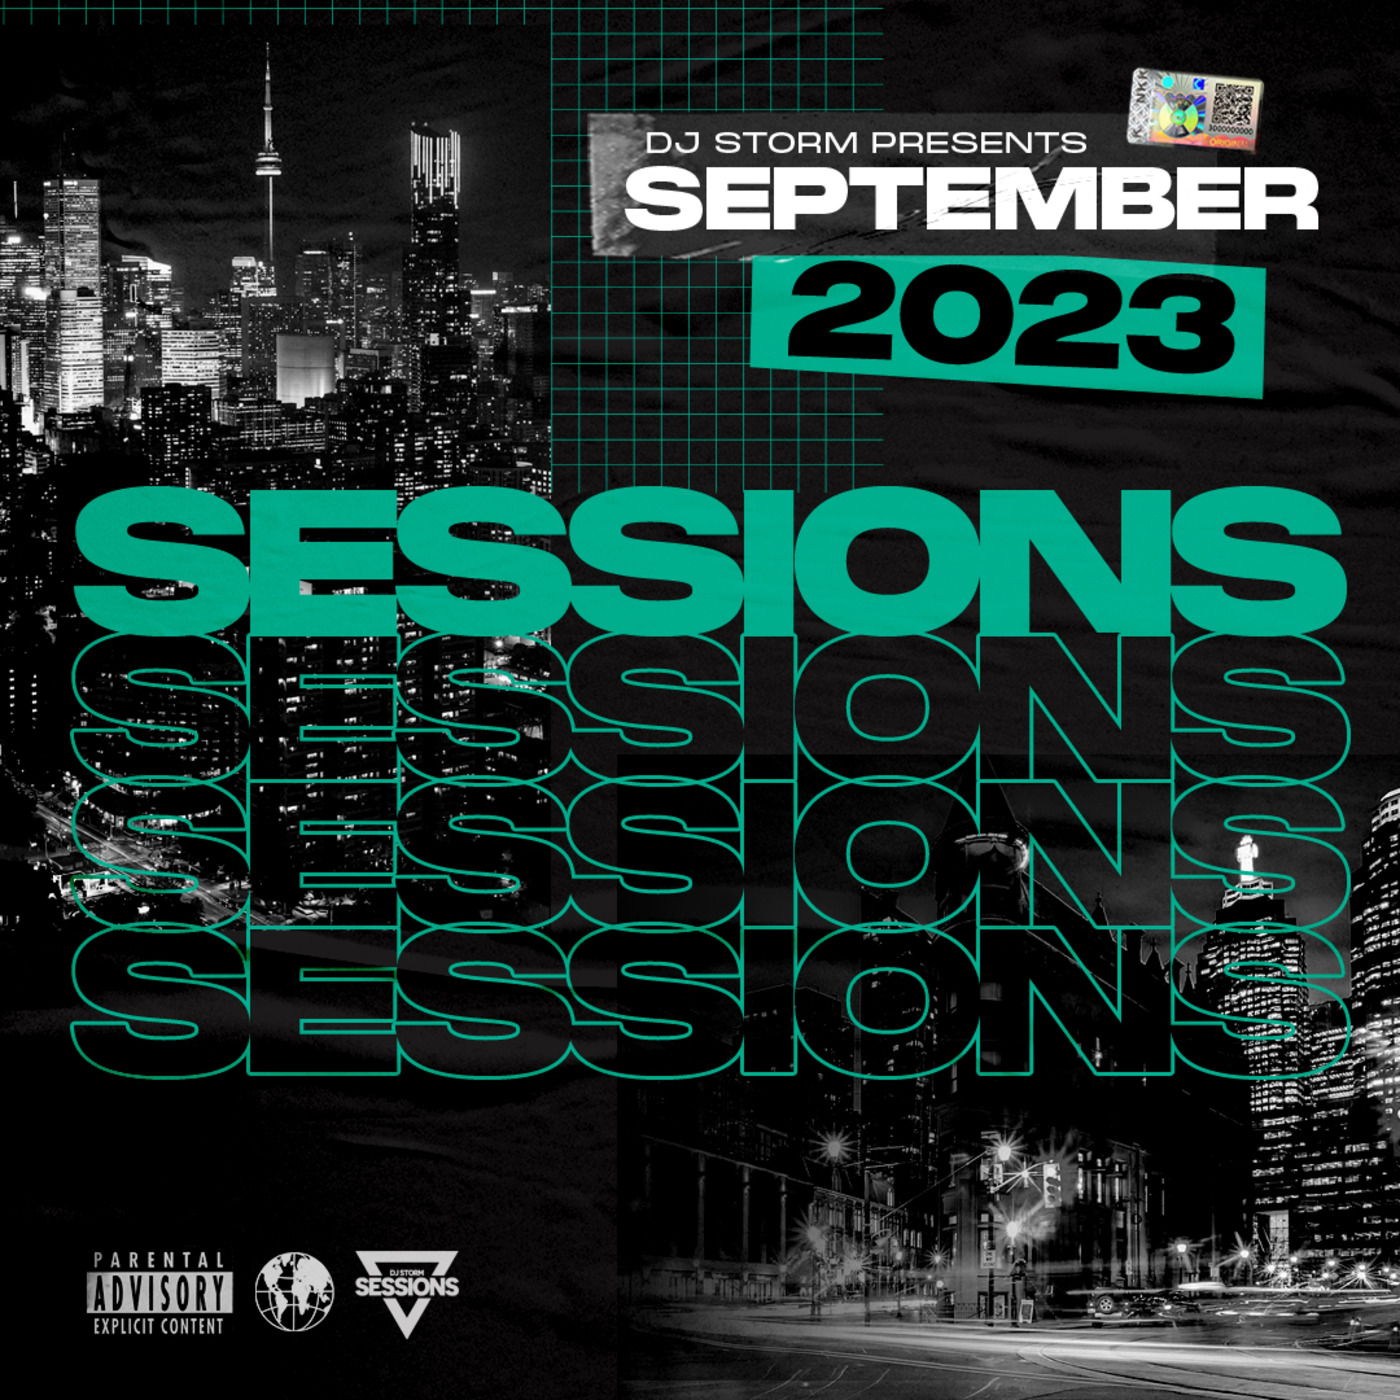 The Sessions - September 2023